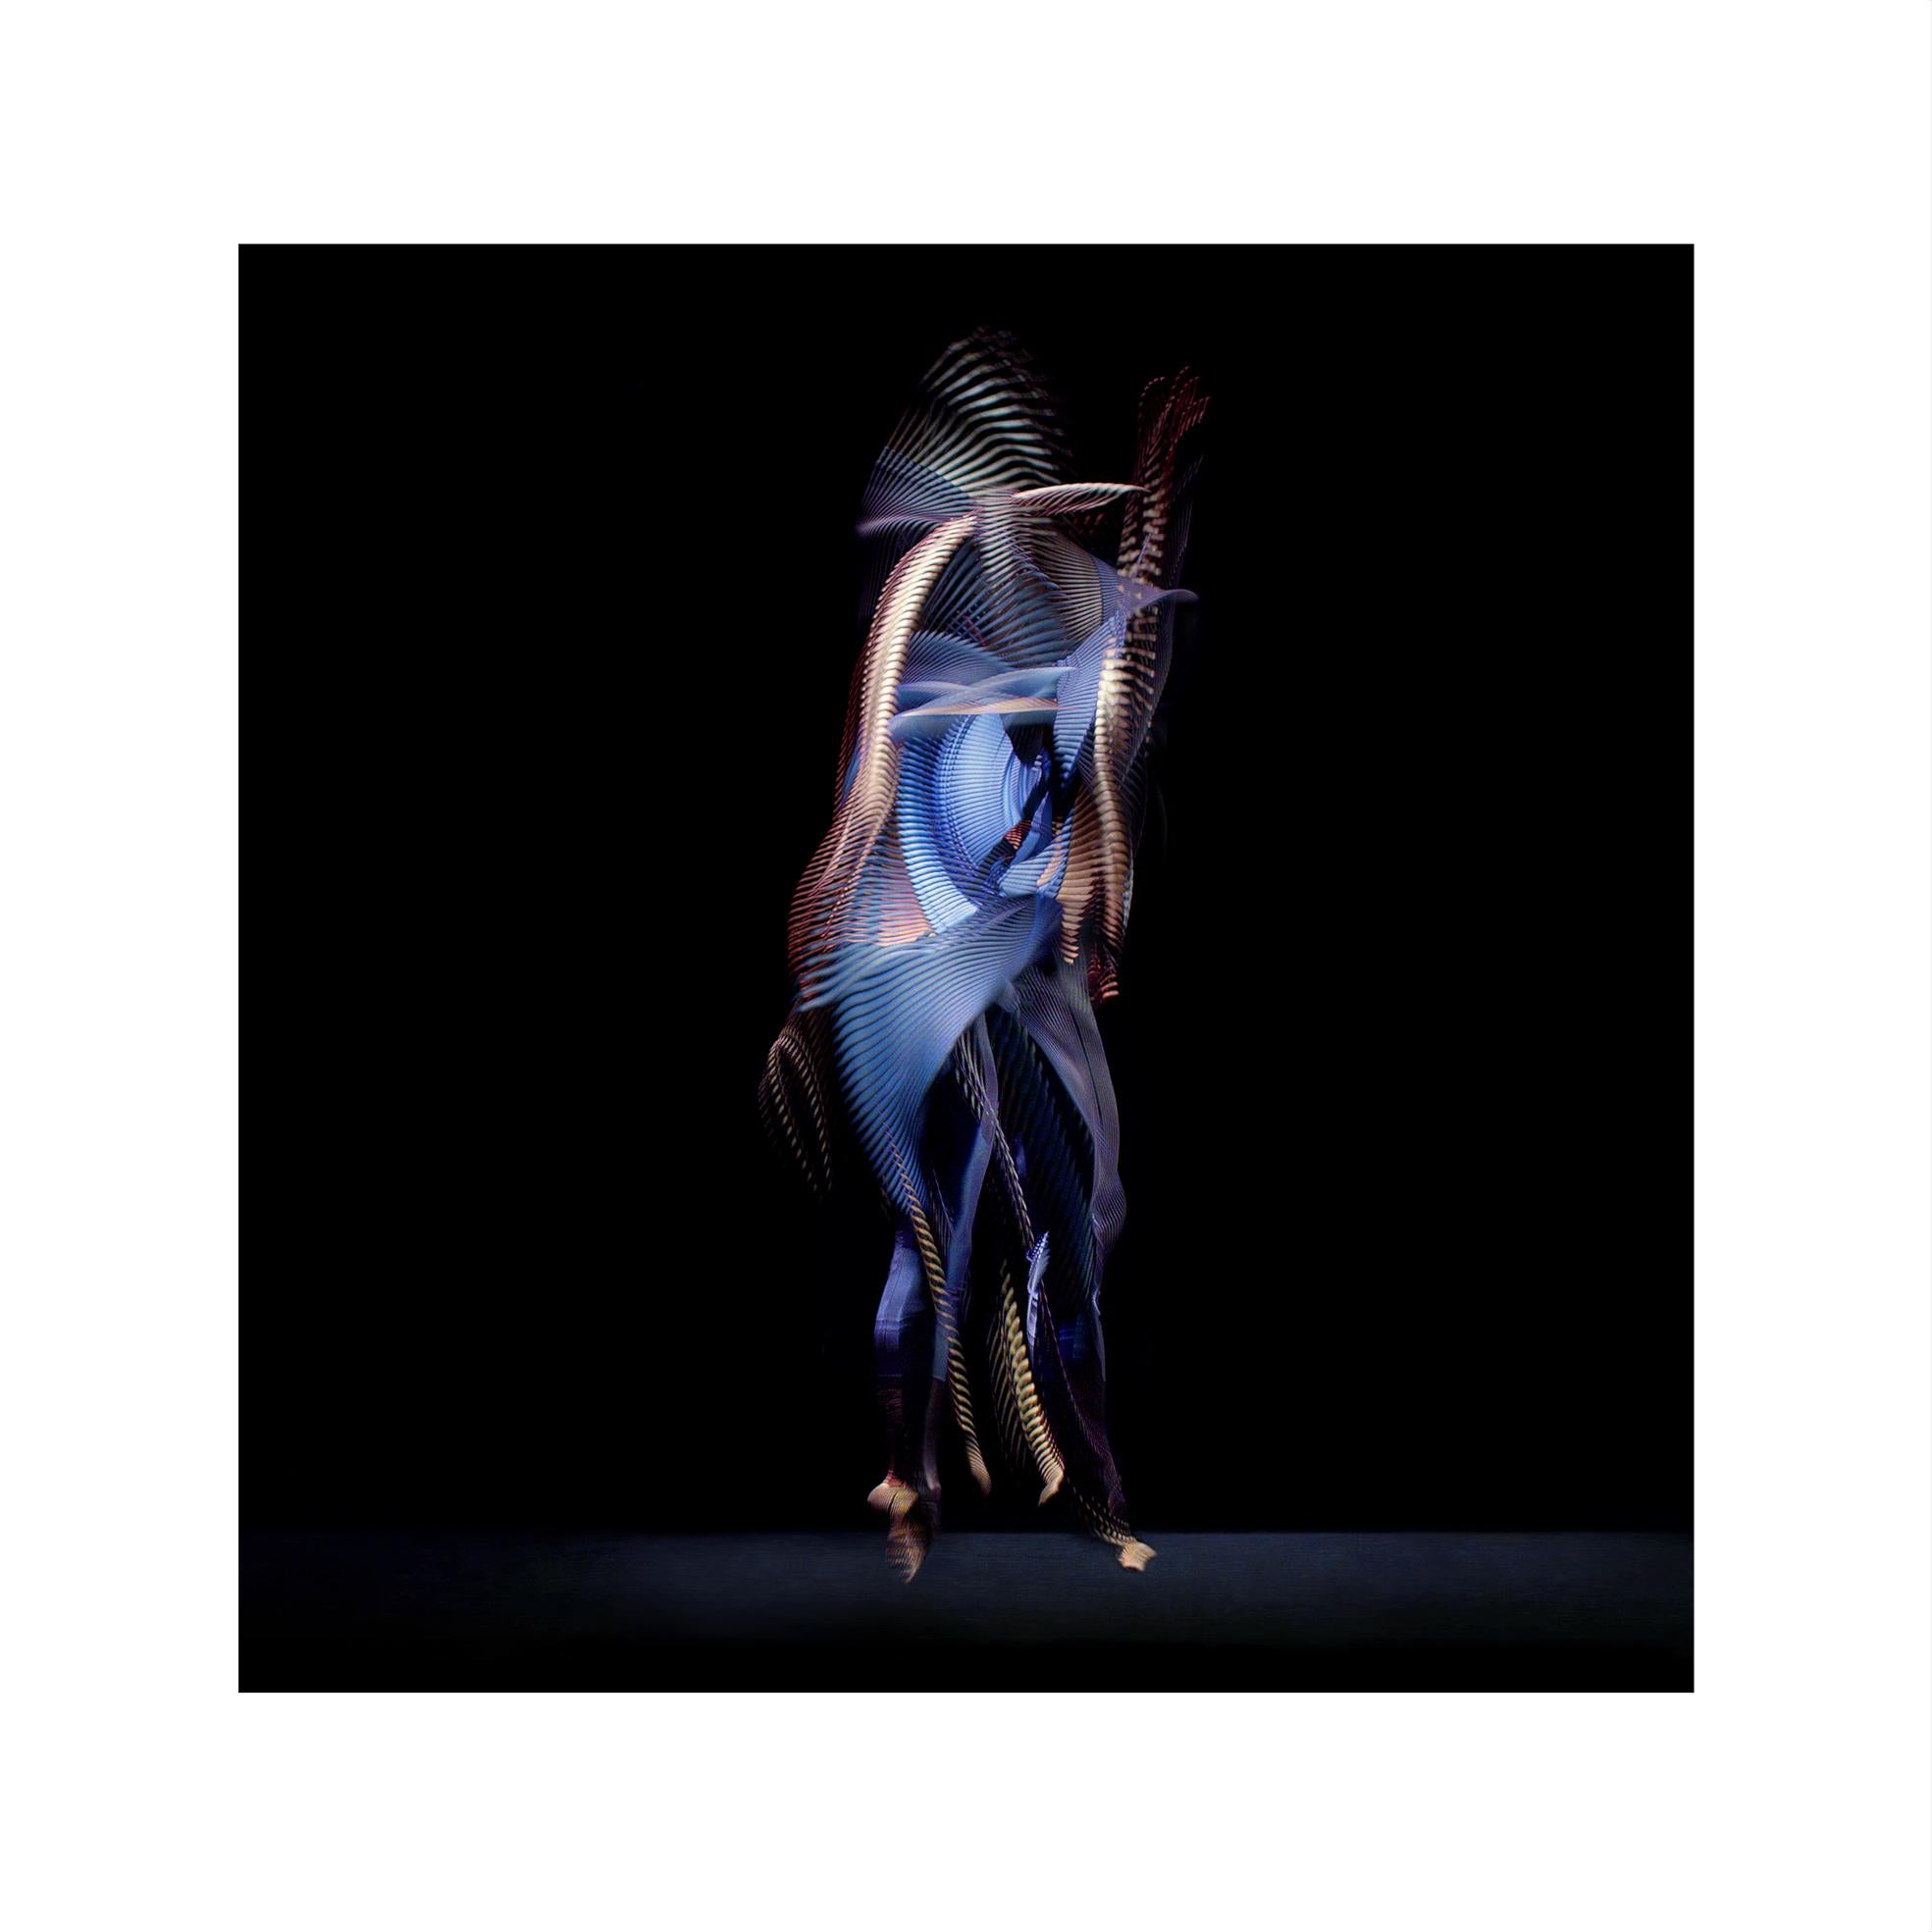 Giles Revell      Portrait Photograph - Abstract Dancers, Dark Blue 5, 2019 by Giles Revell - Photography, Ballet, Black